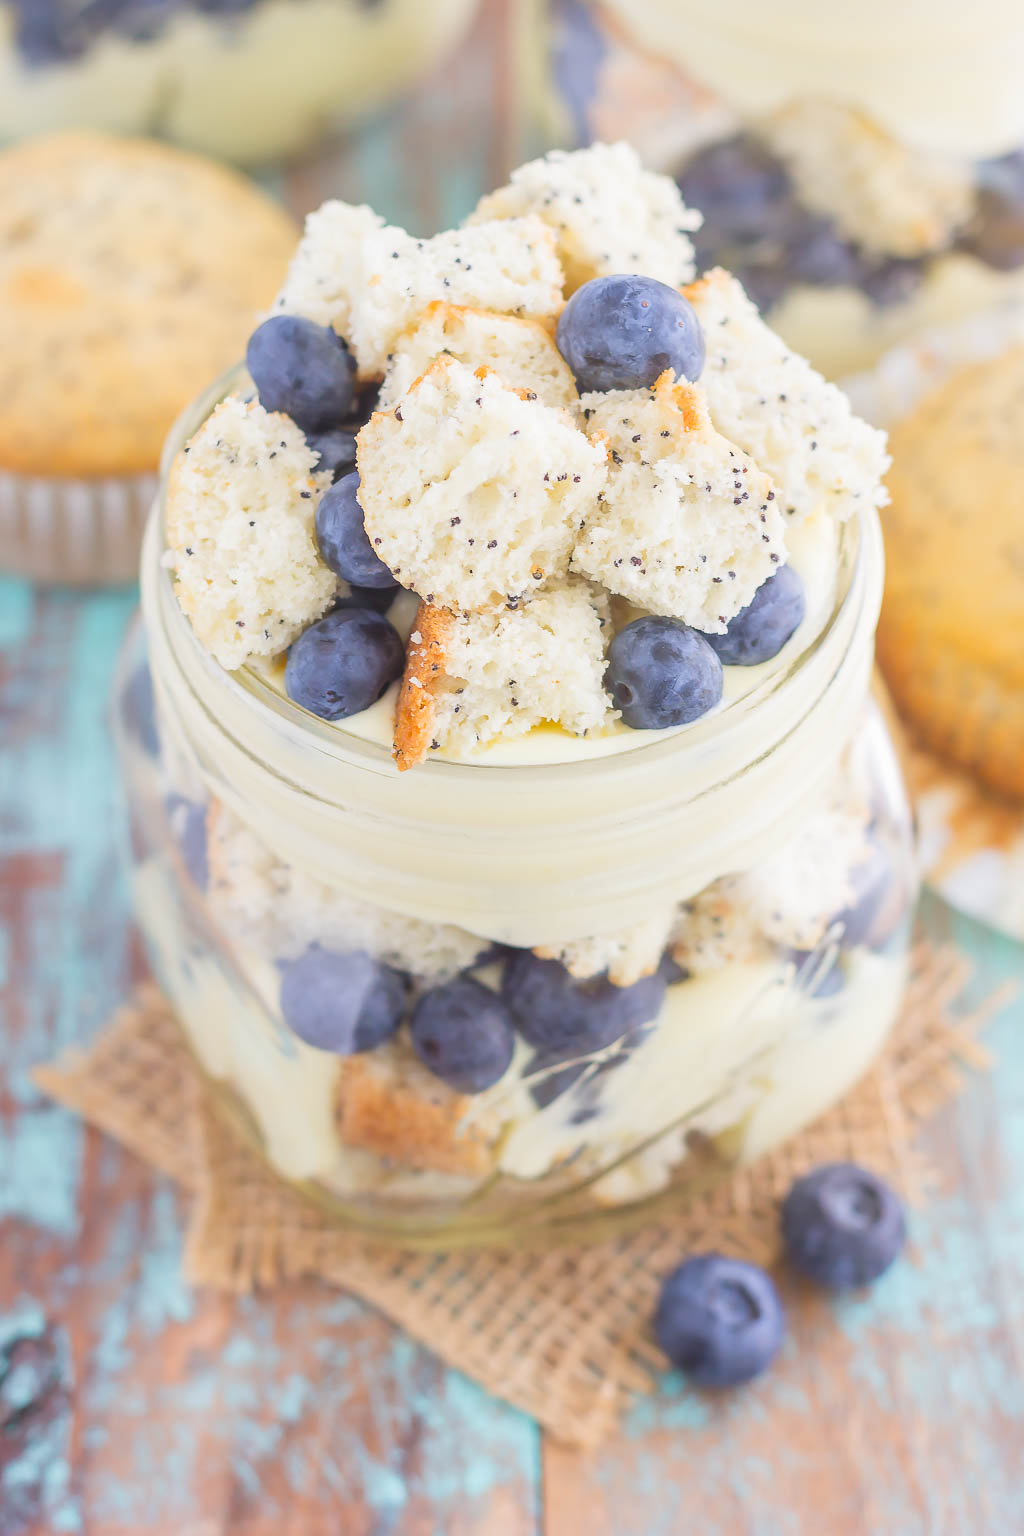 Blueberry Almond Poppy Seed Muffin Trifles are filled with creamy, whipped vanilla pudding, almond poppy seed muffin chunks, and fresh blueberries. It's layered together to create a simple dessert that's ready in no time!